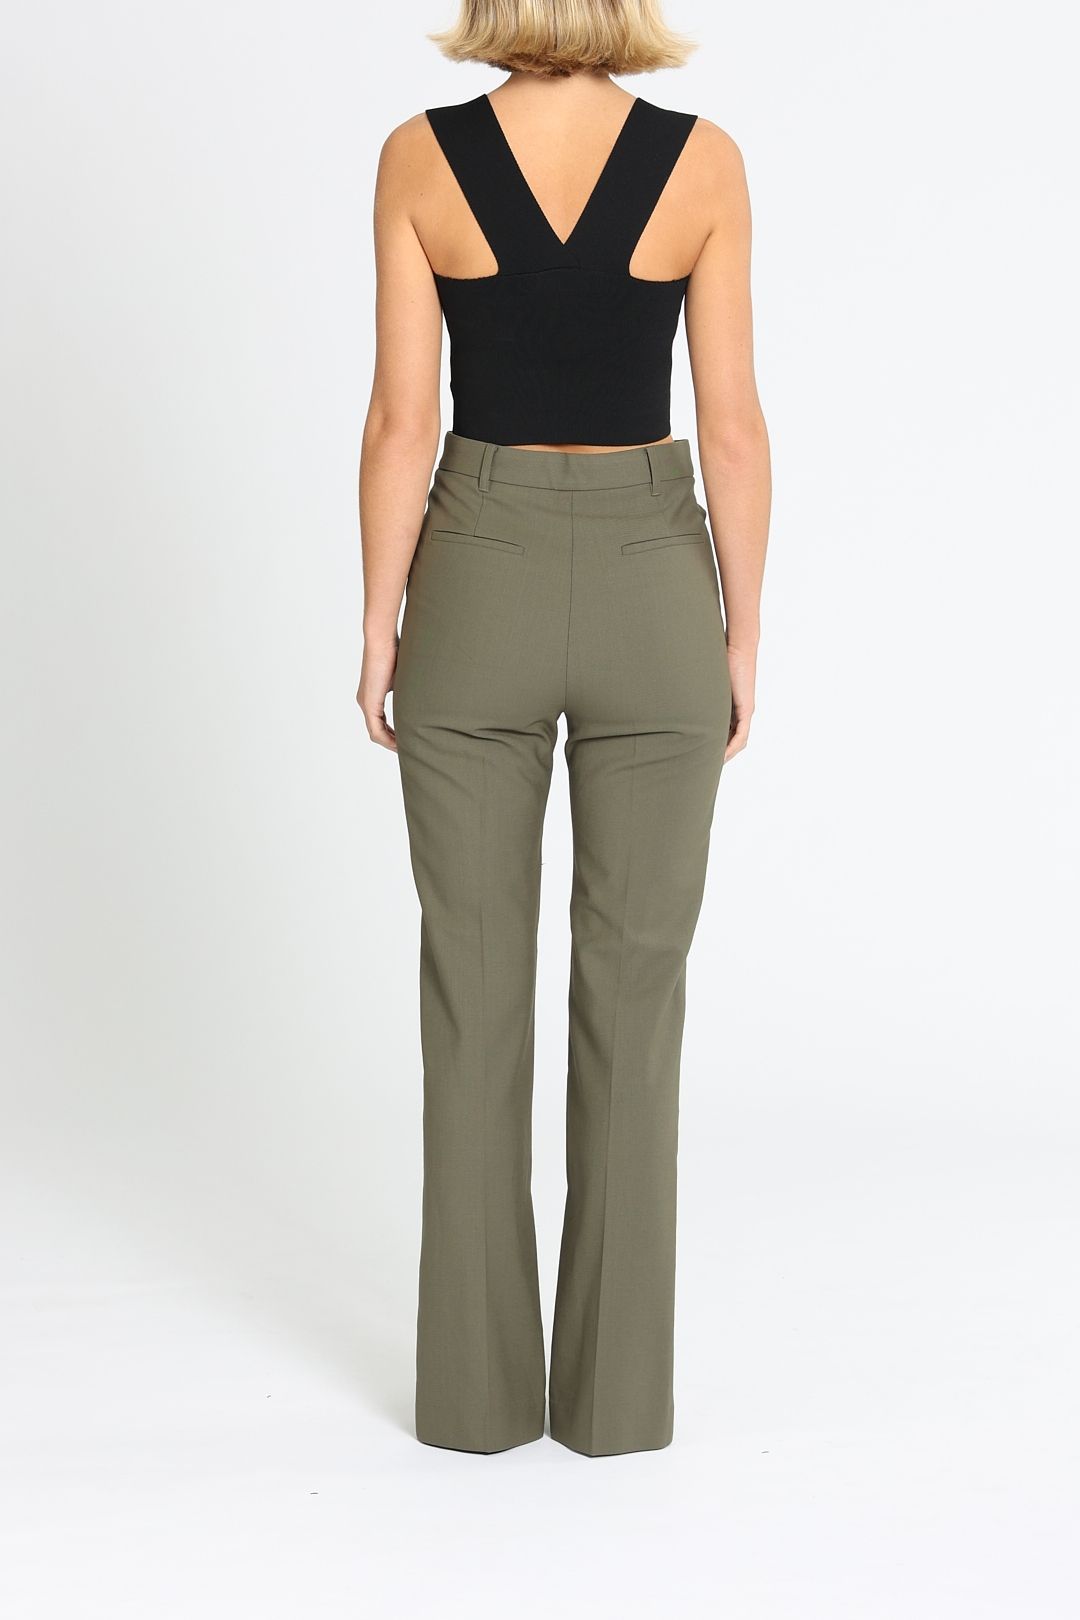 Camilla and Marc Mateo Tailored Pant Willow Green Straight Leg